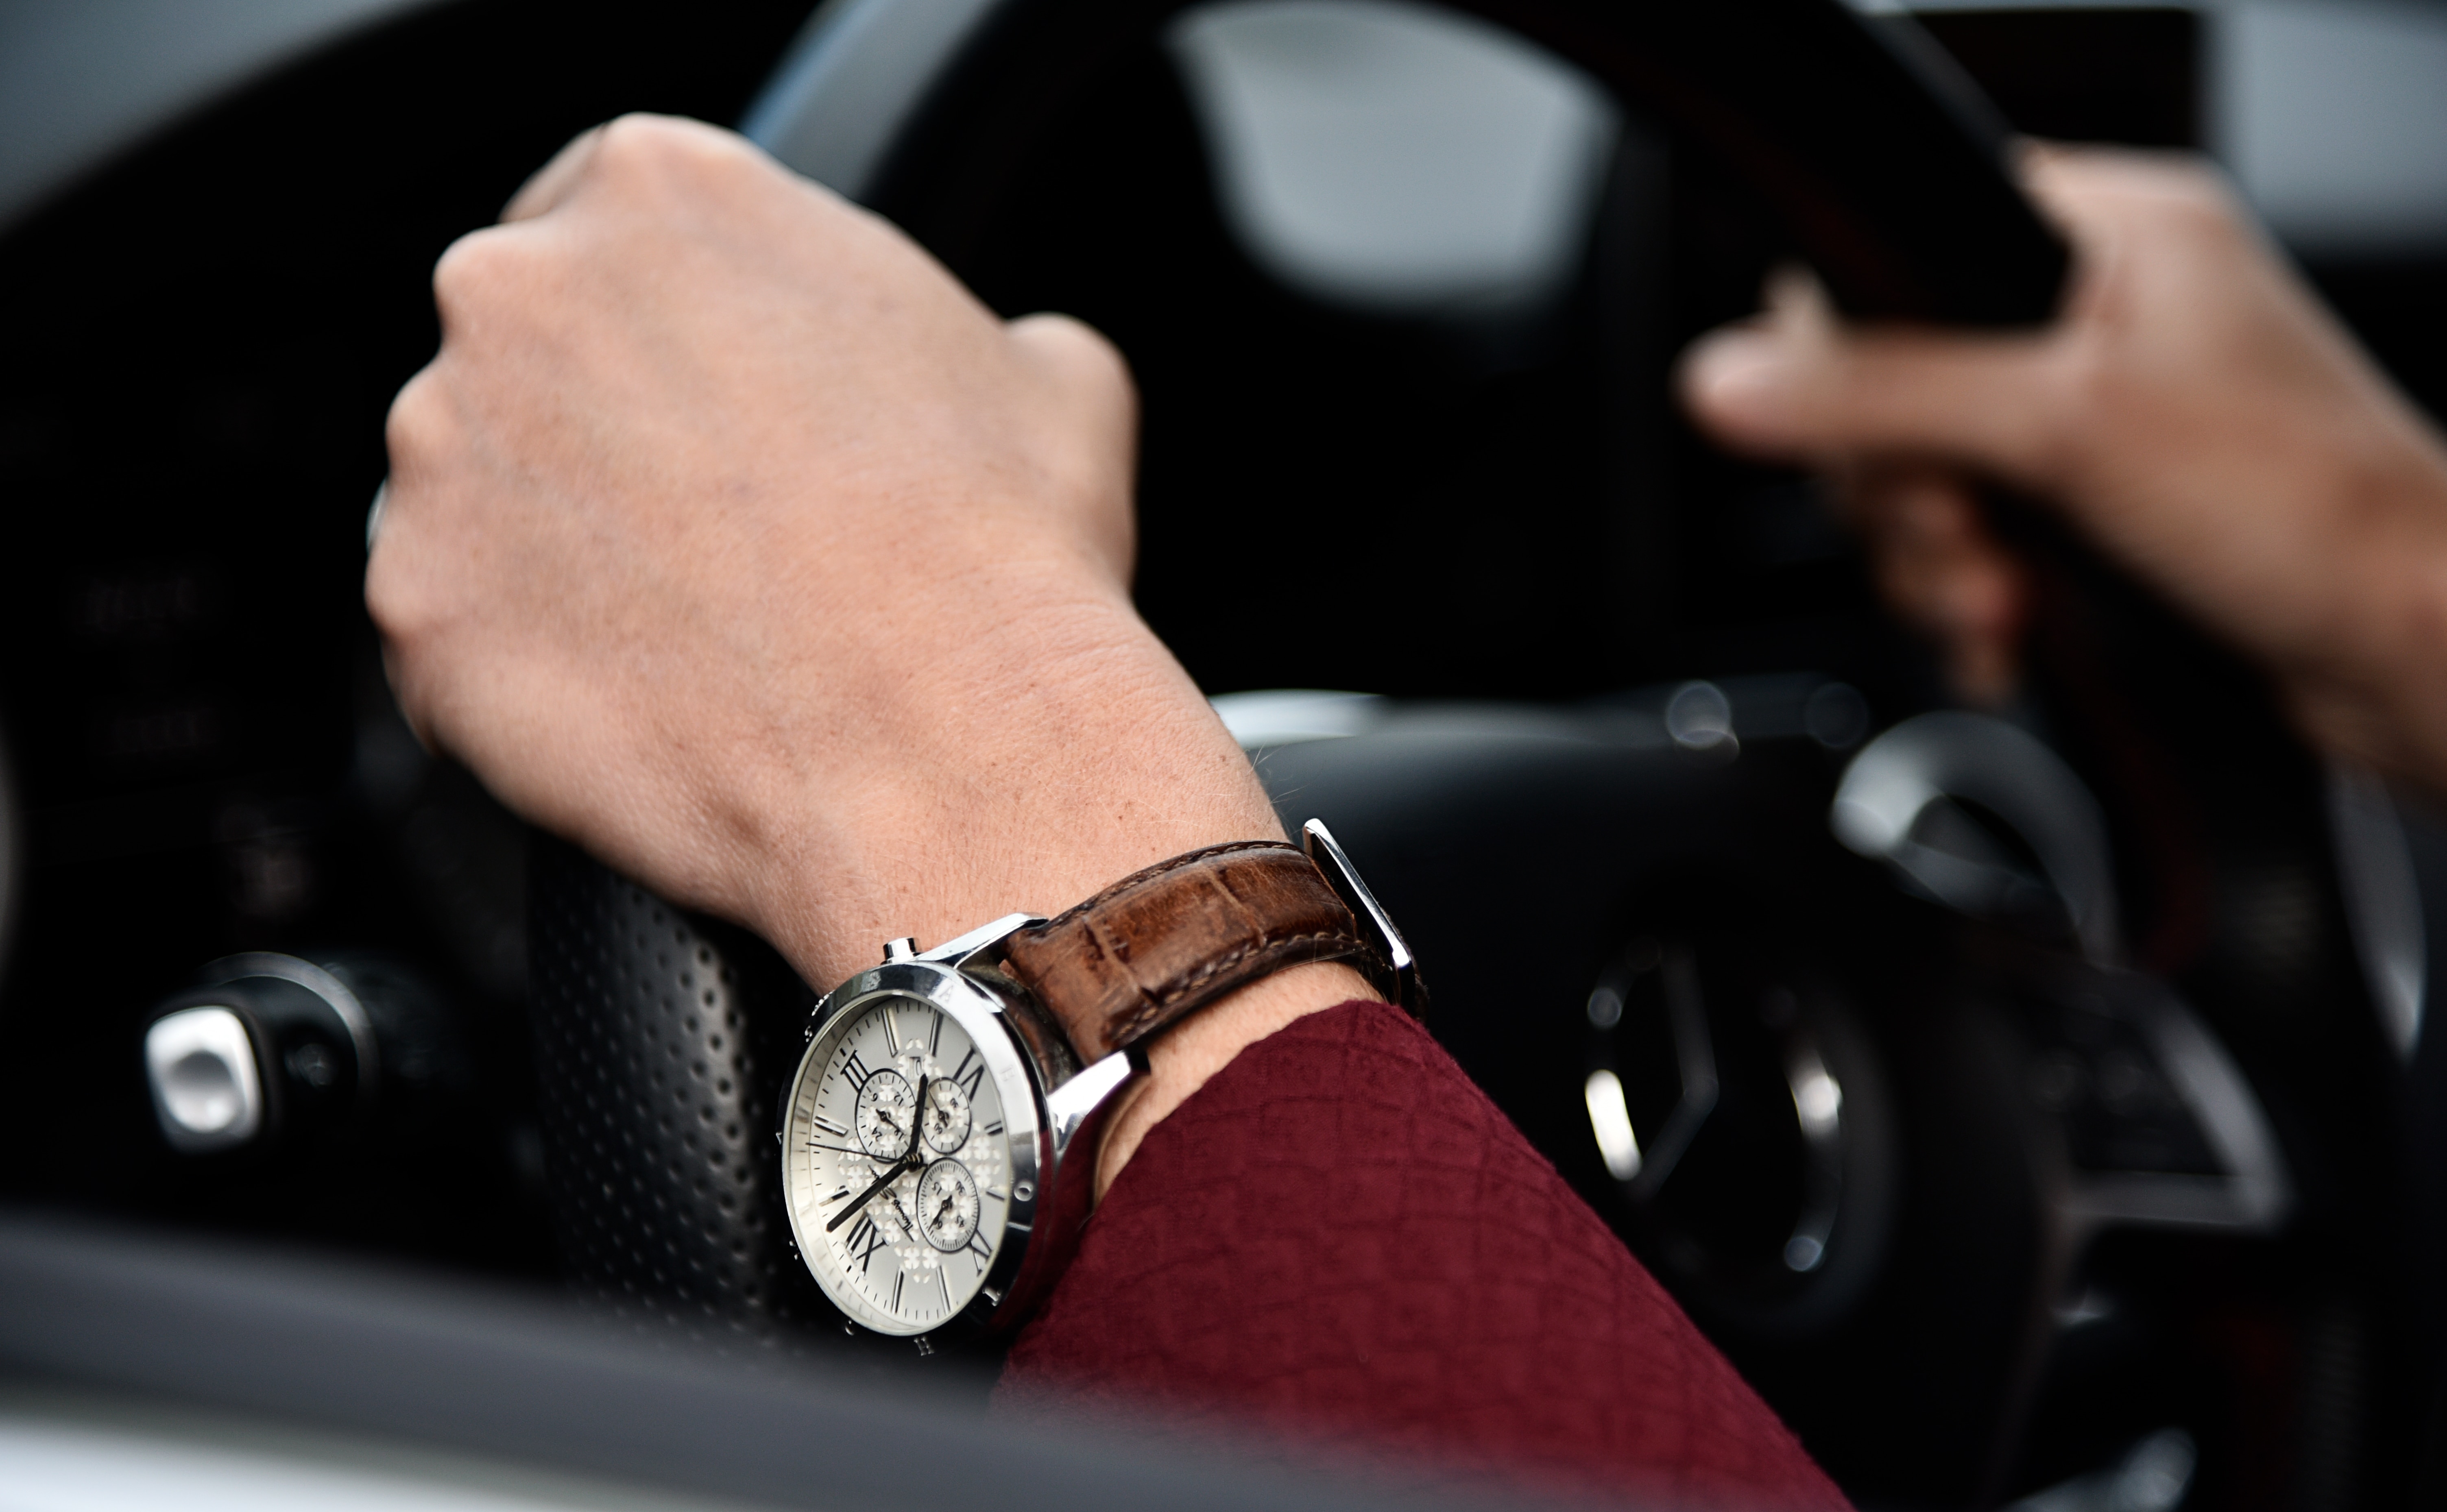 person wearing red long sleeve shirt and round silver chronograph watch with brown leather strap holding car steering wheel